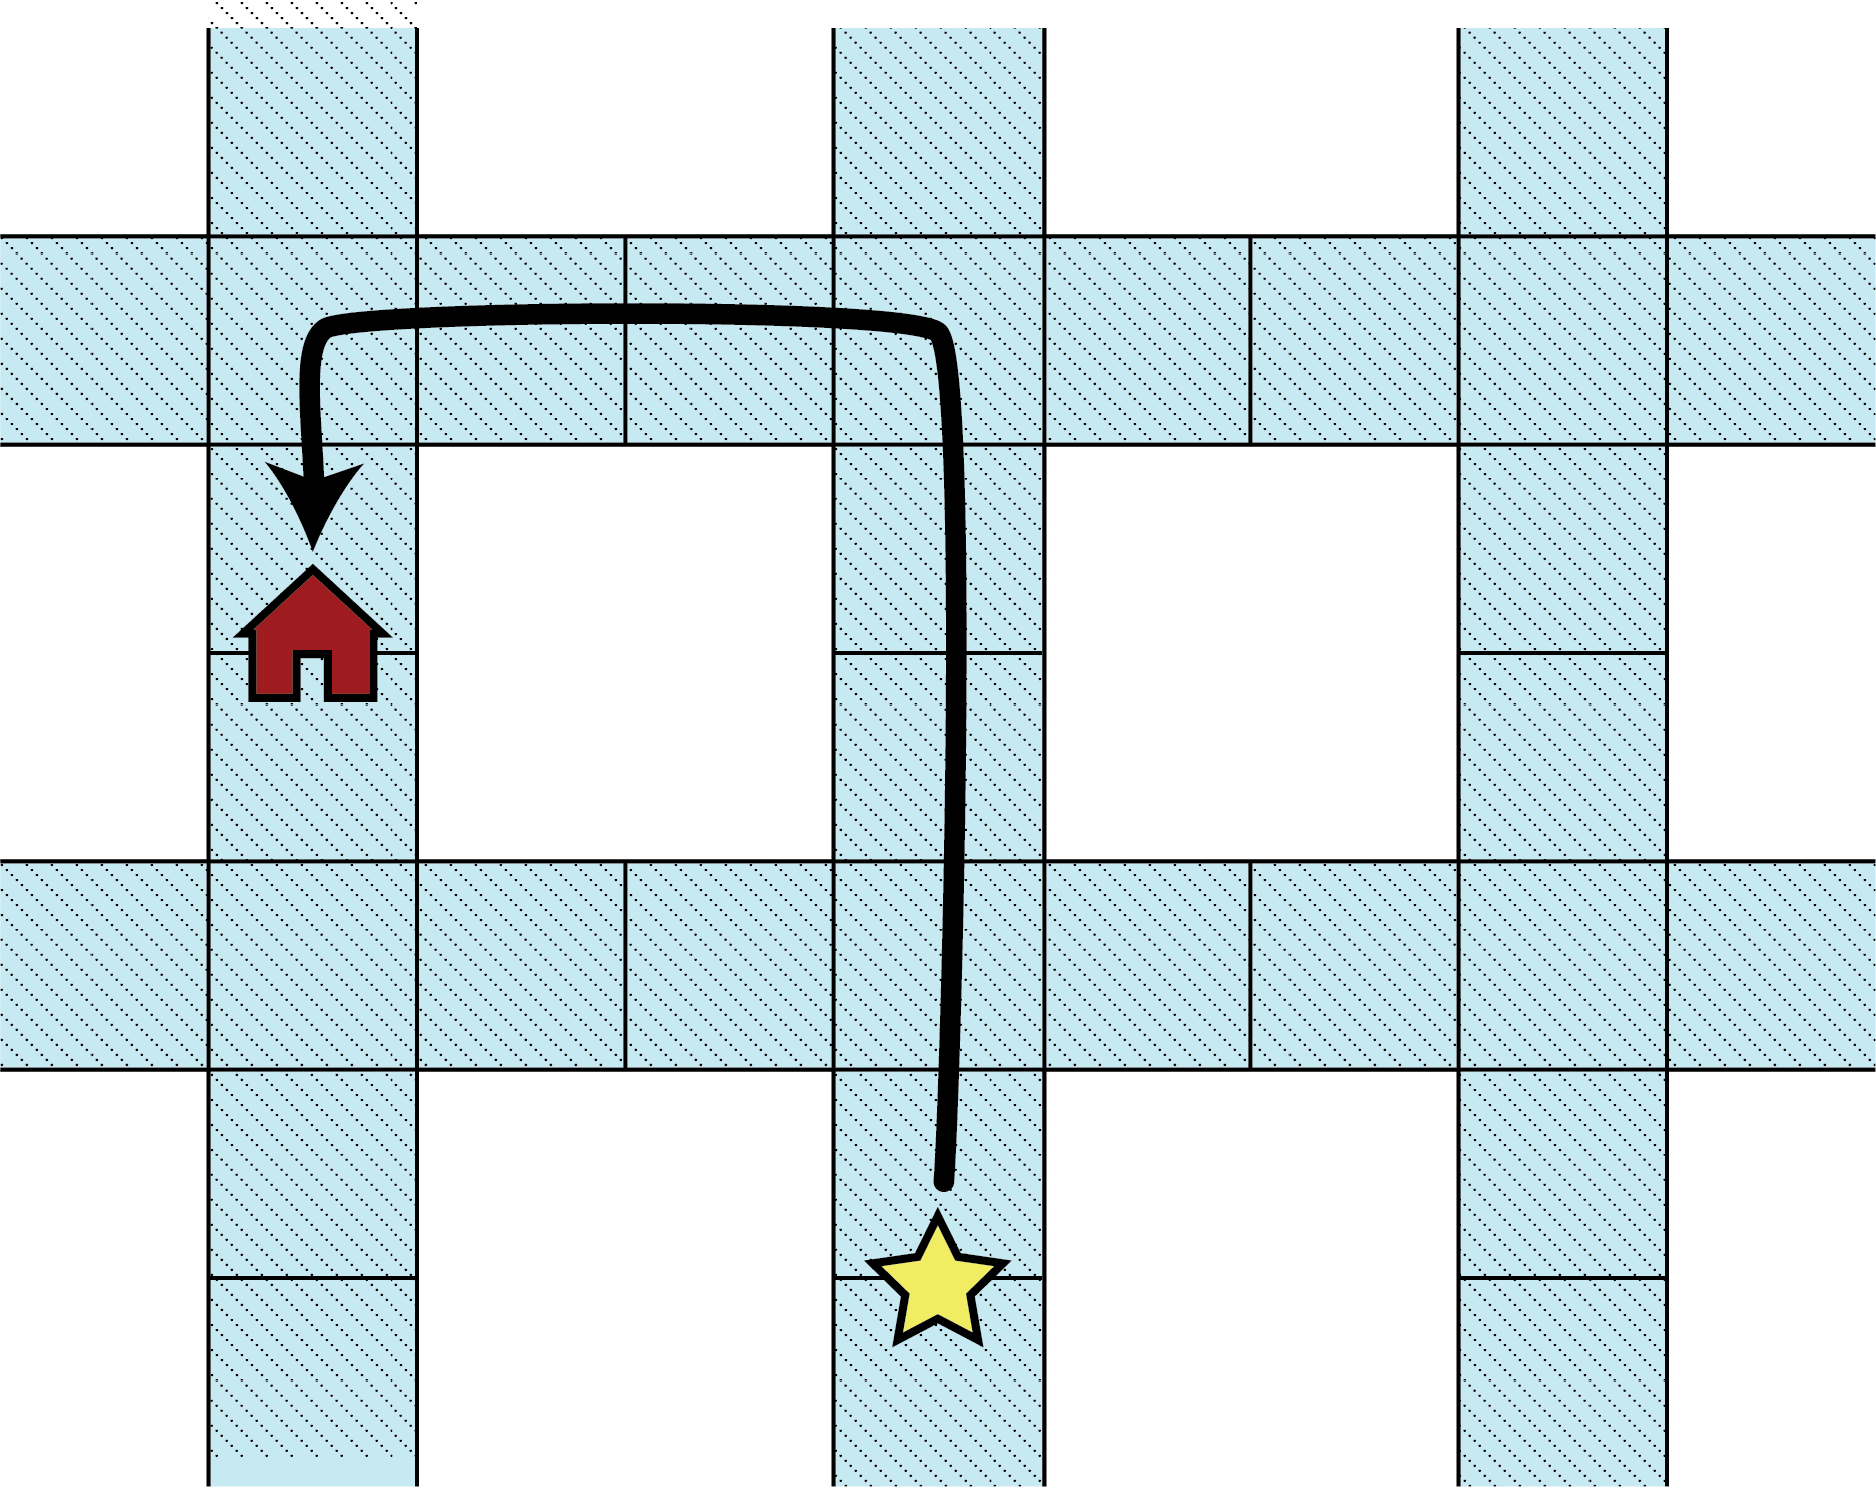 A path starts from the star and moves to the intersection
    square in the second row and fifth column, then to the intersection of
    the second row and second column, and then to the house.